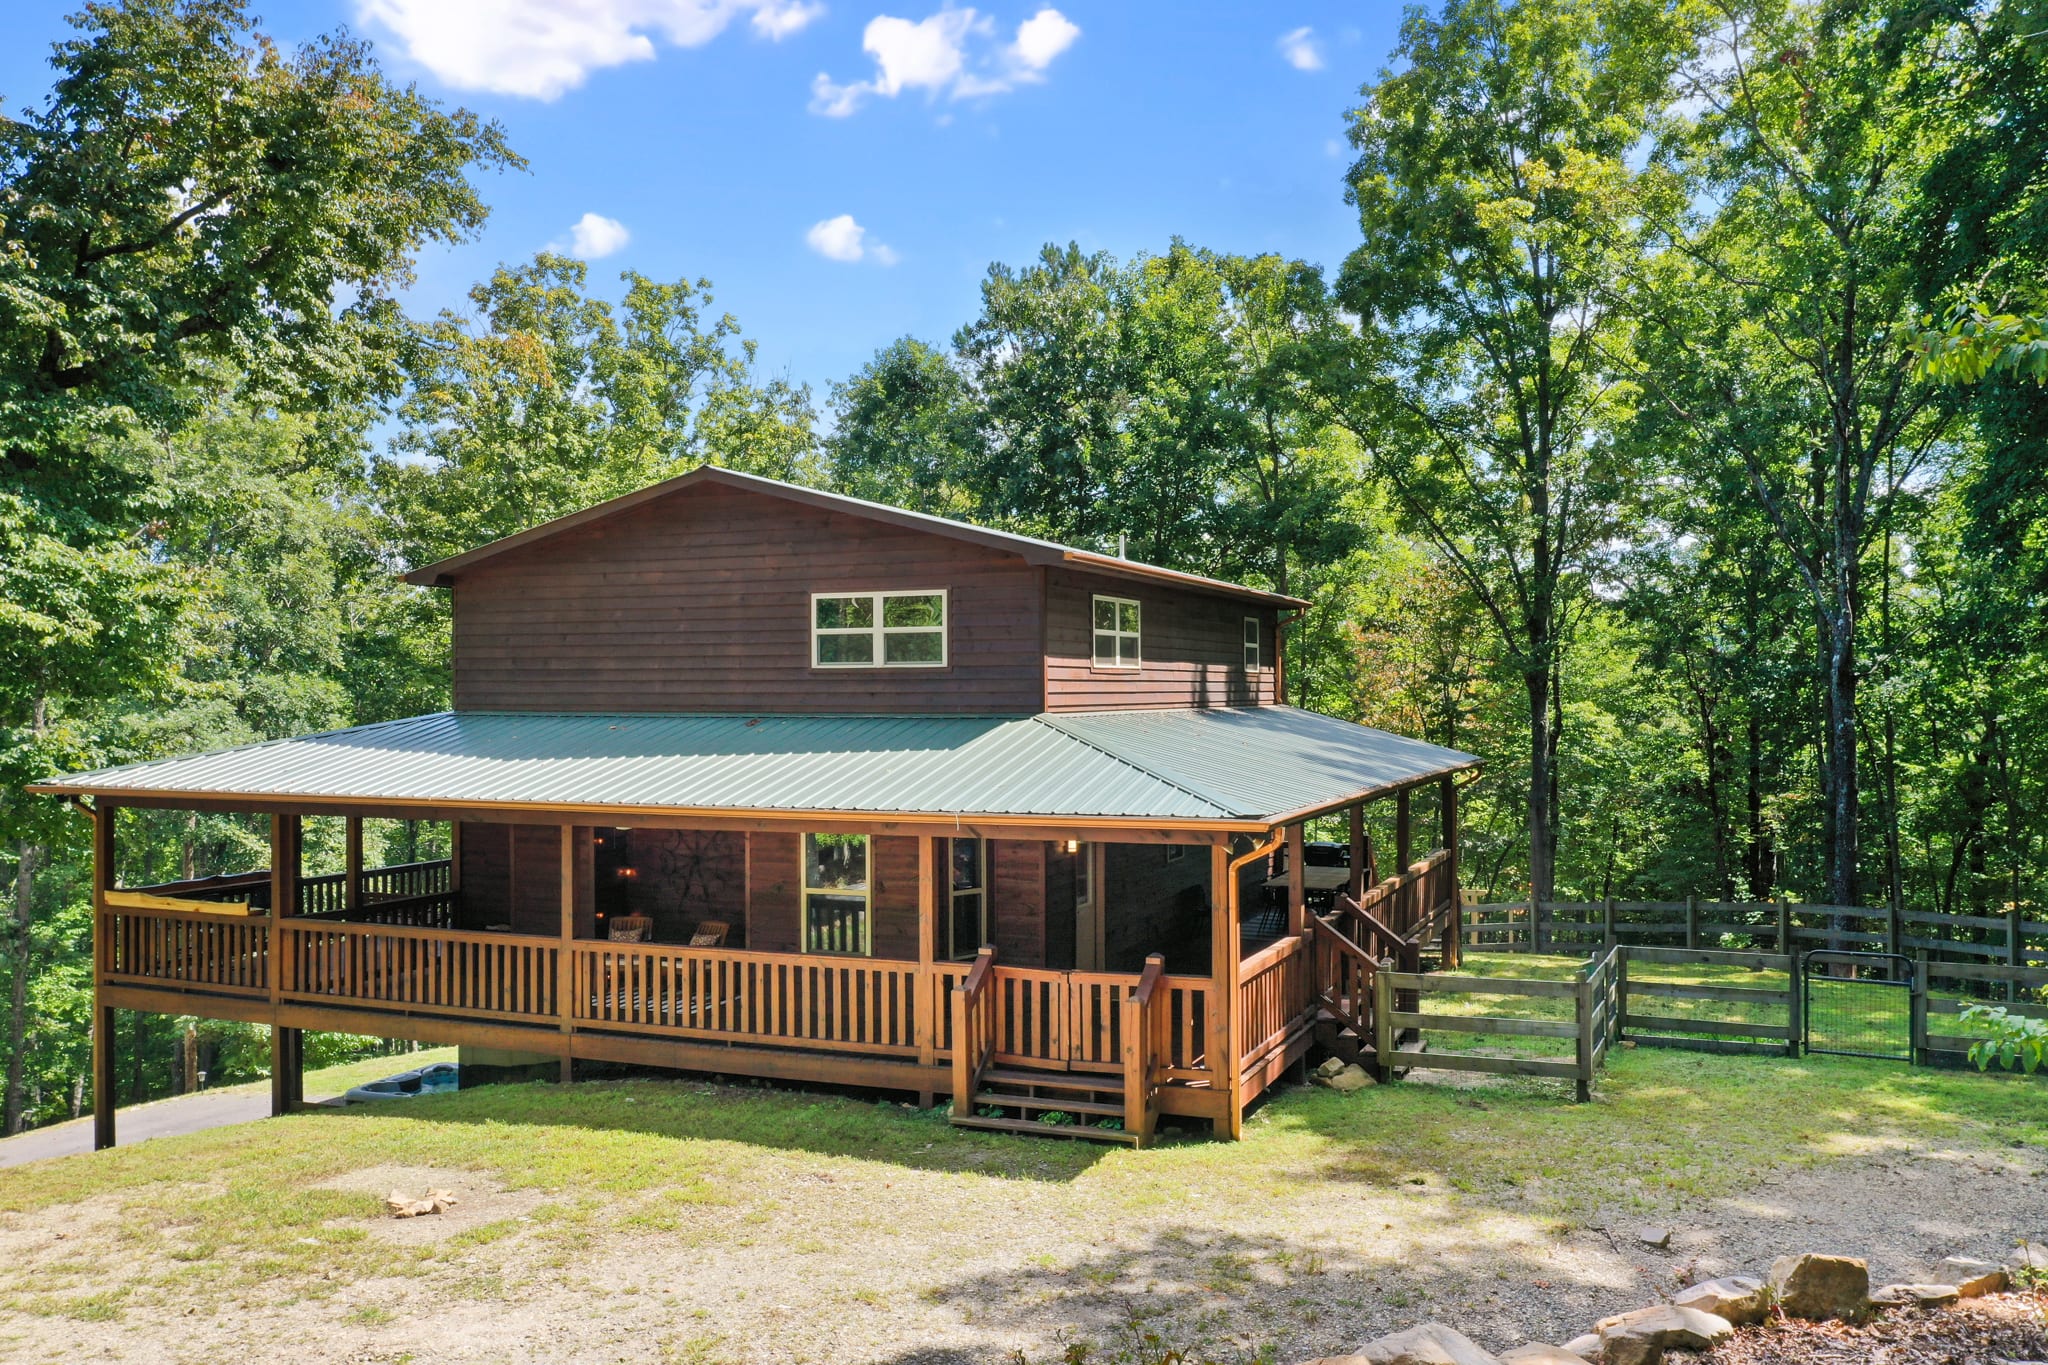 The cabin has a wrap around porch with gathes to keep your furry friends close, as well as a fenced in yard for them to roam!